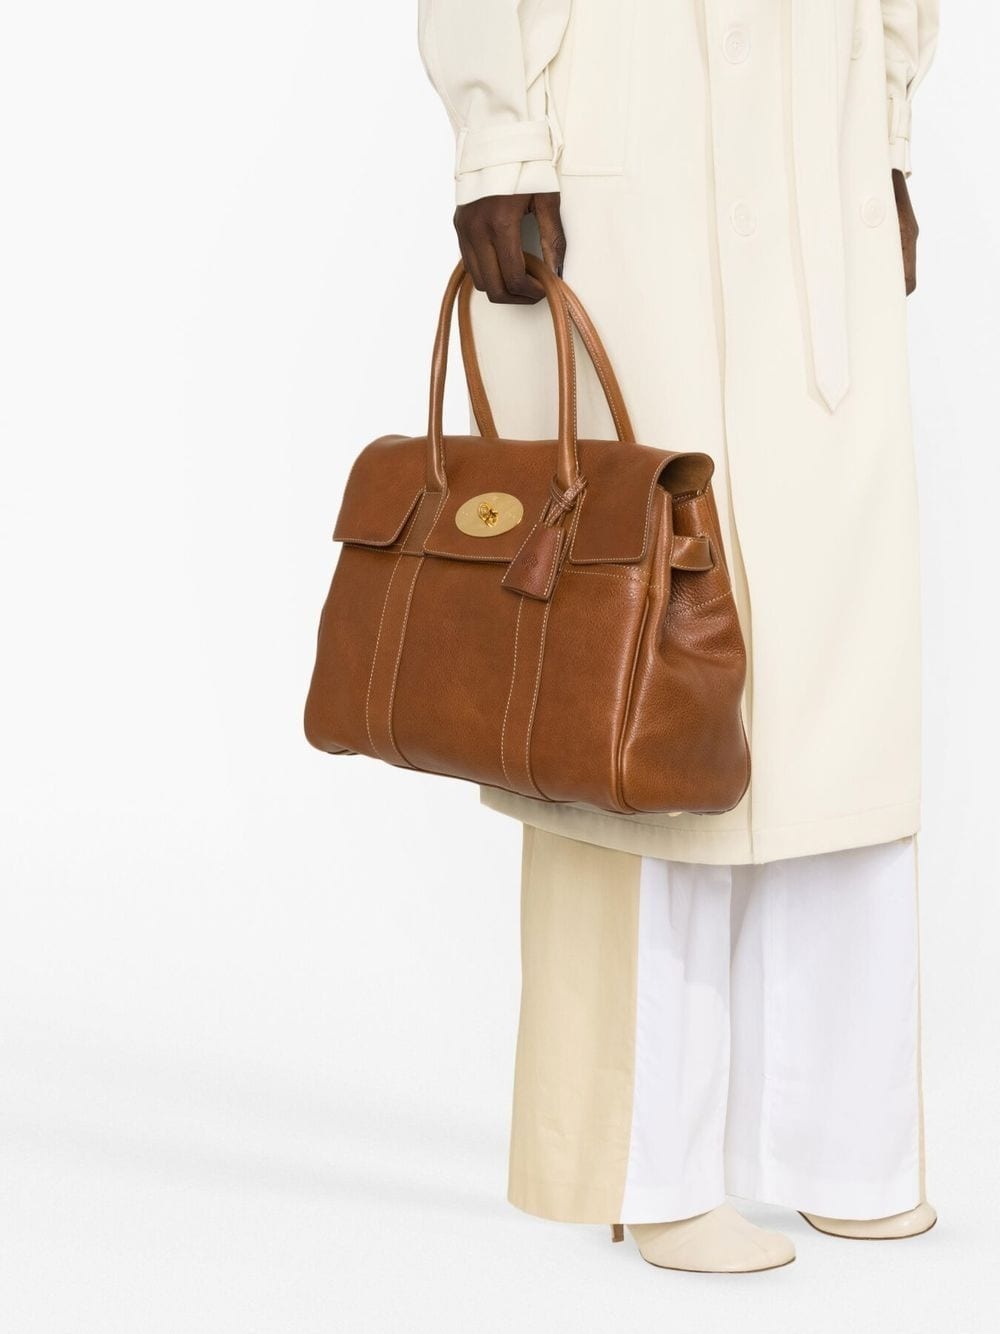 Bayswater leather tote bag - 3